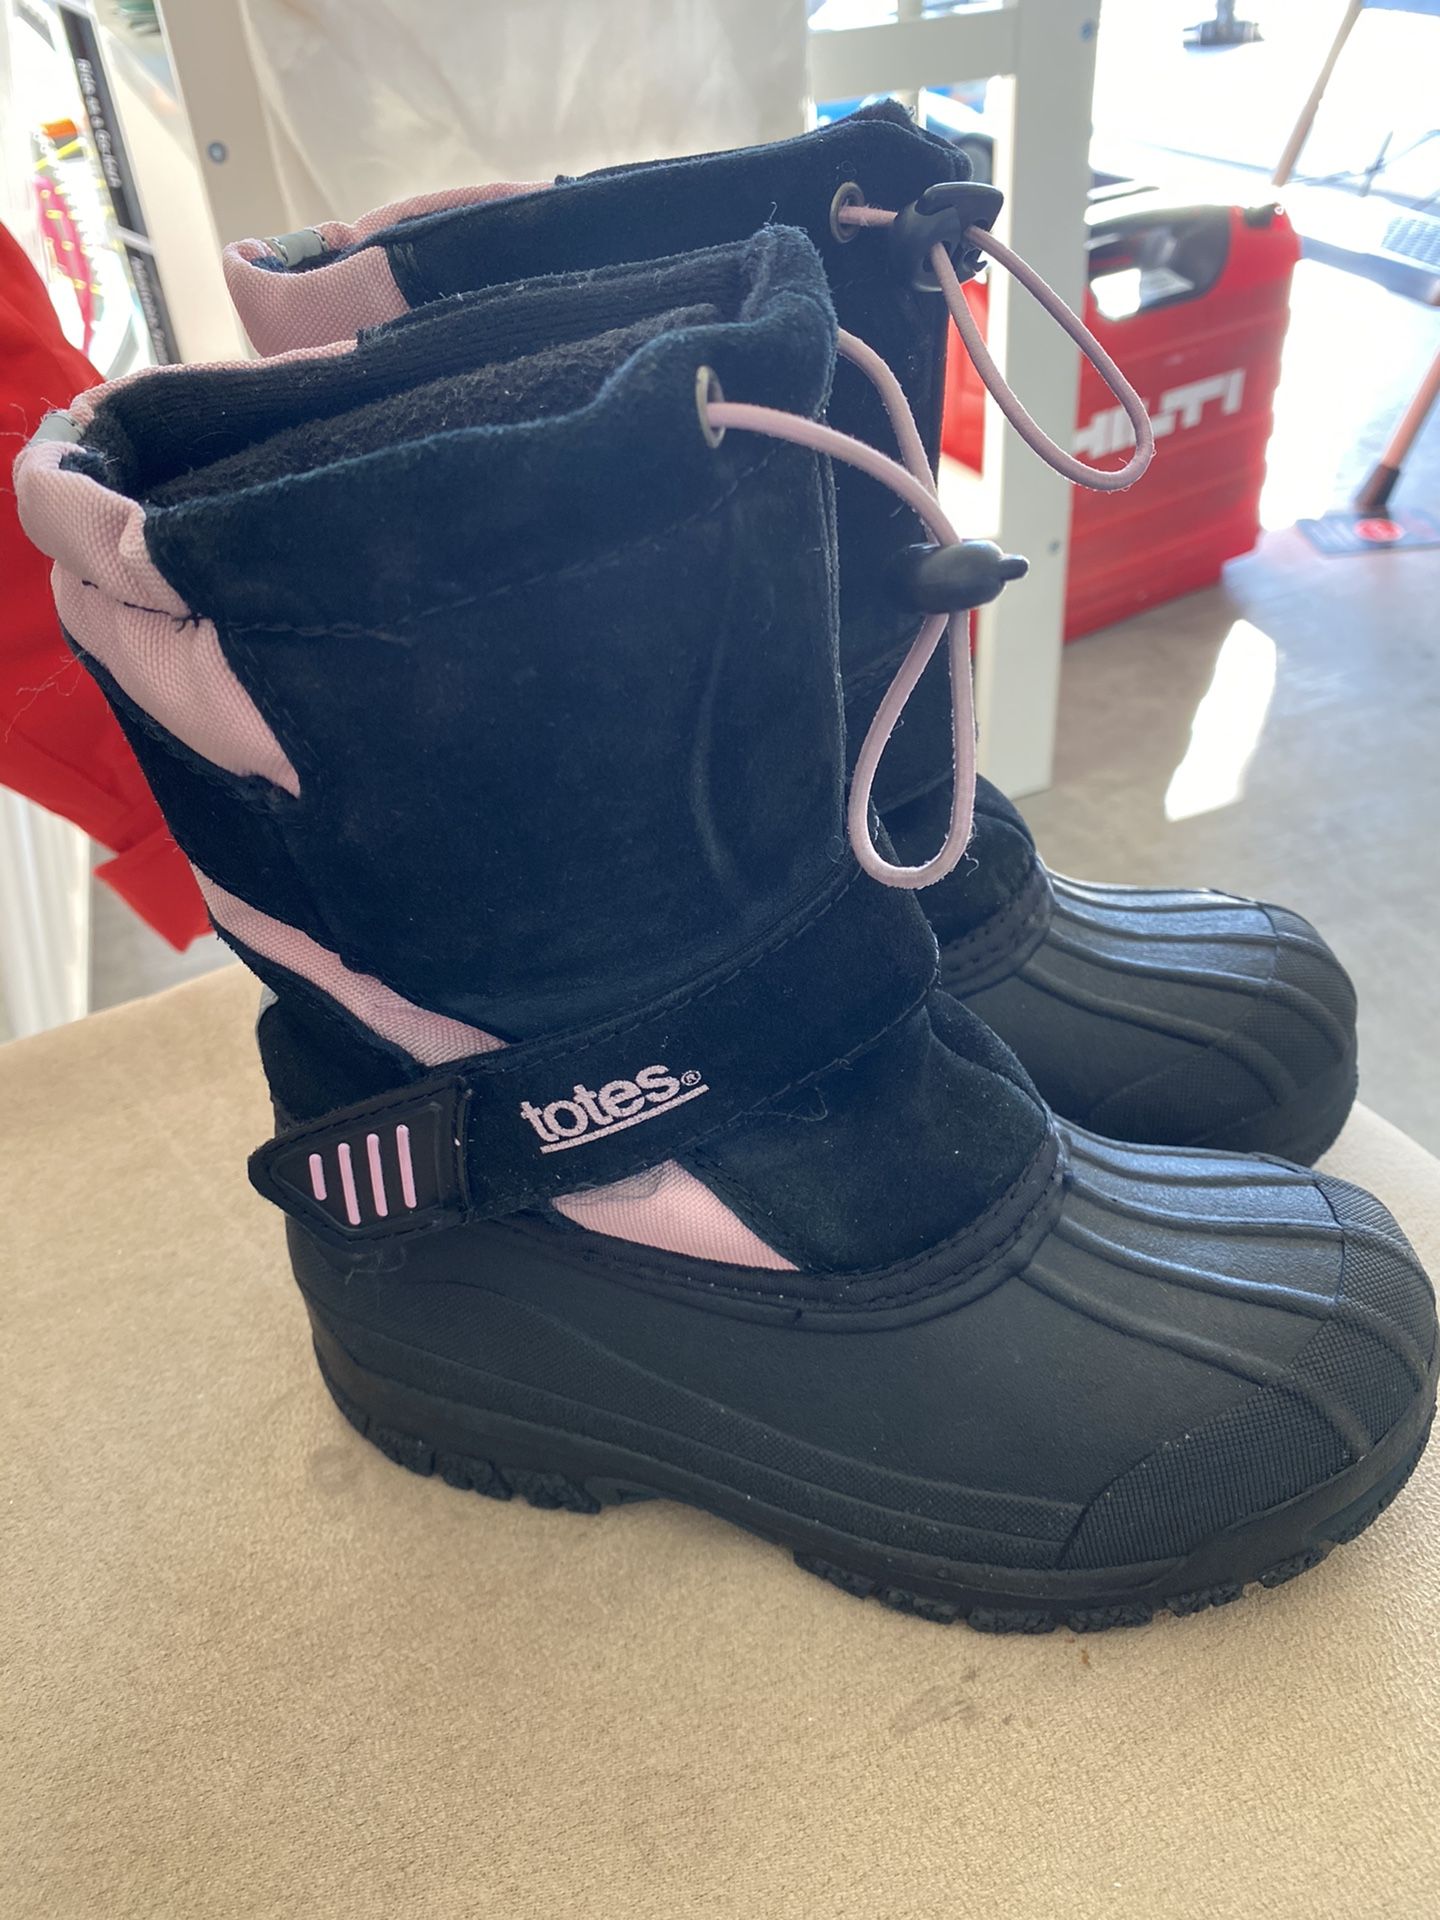 Snow boots for girl size 13